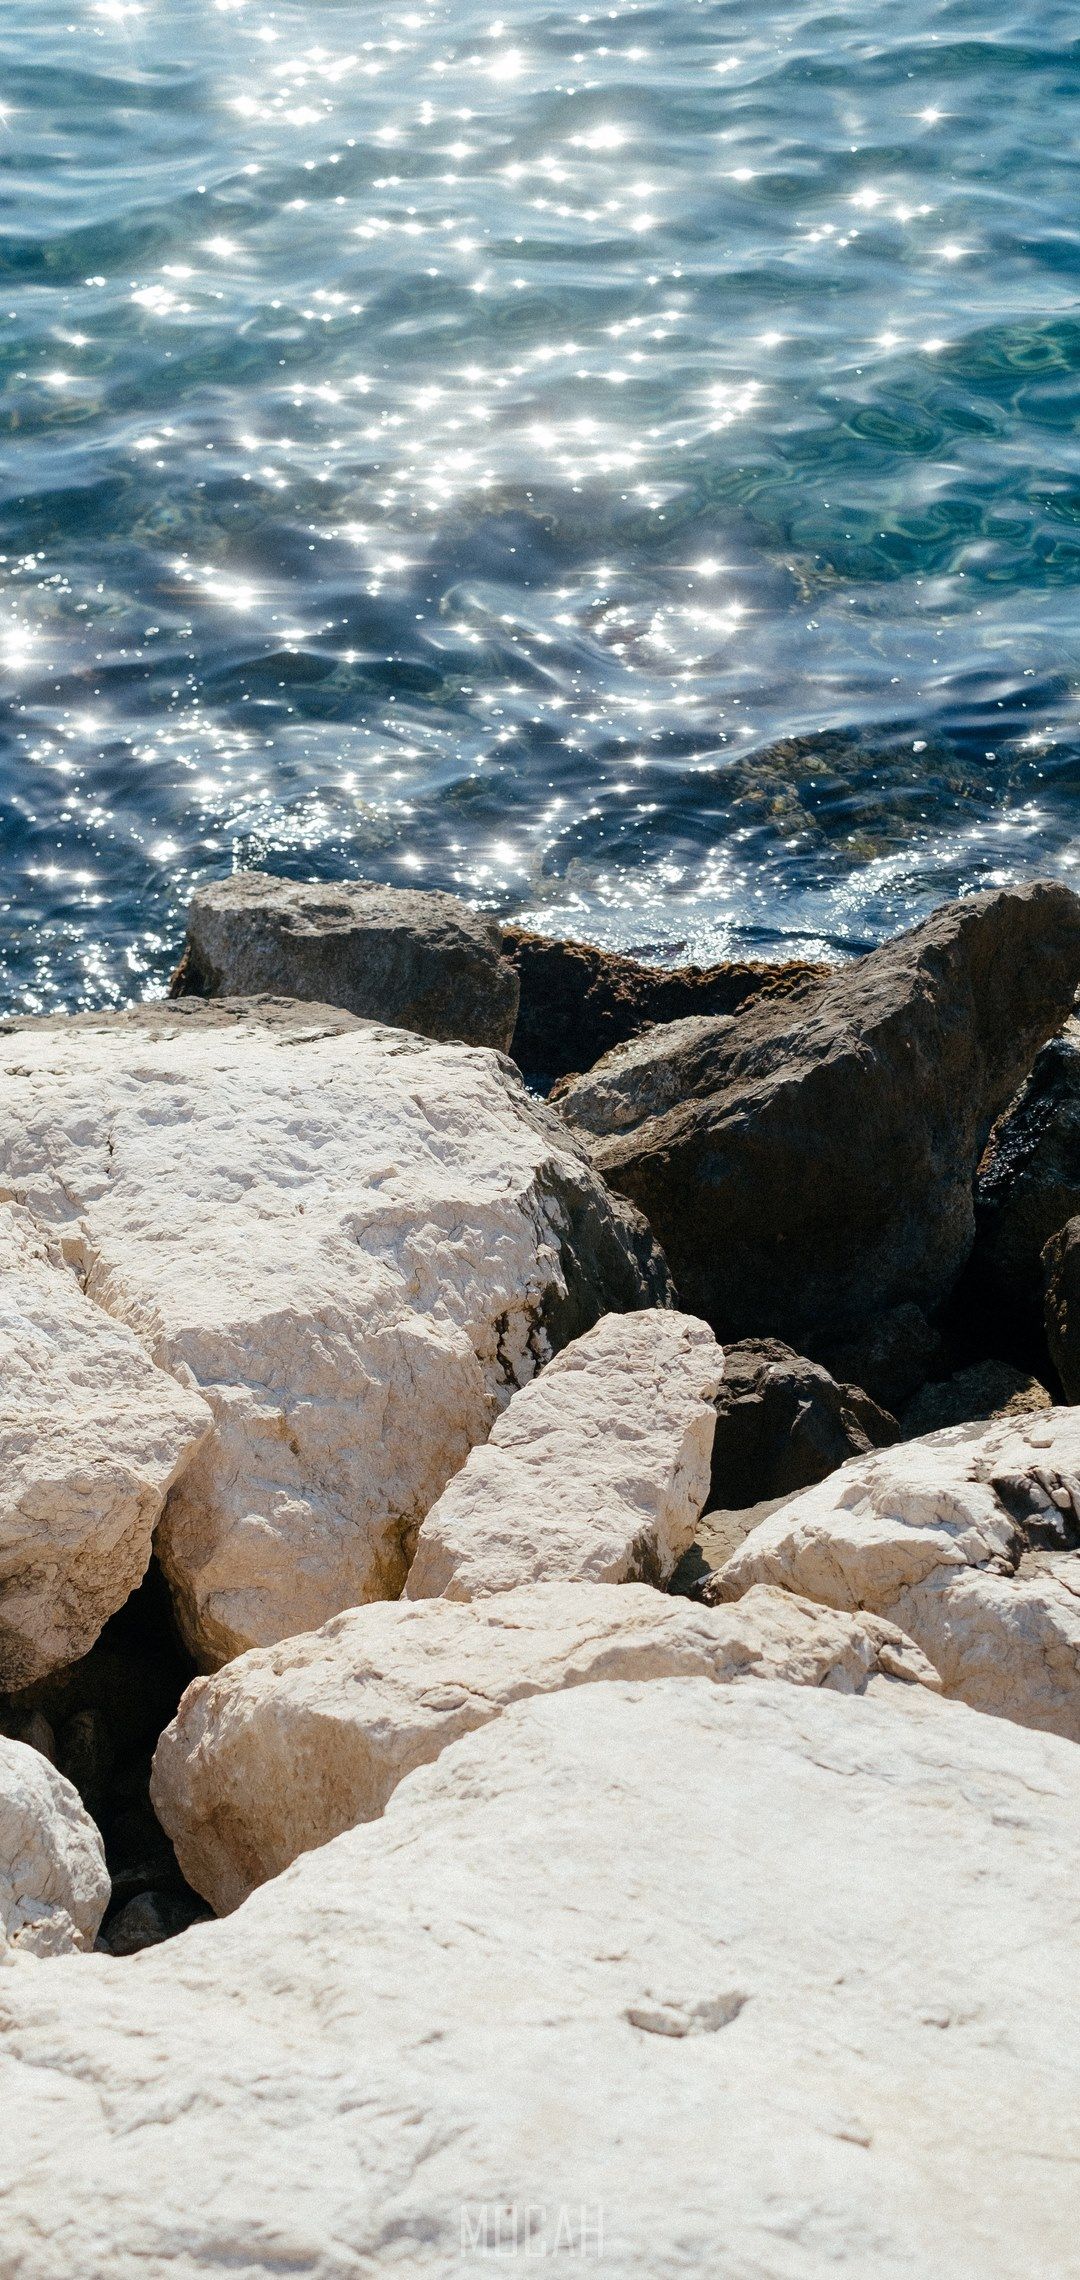 A person sitting on the rocks by water - Beach